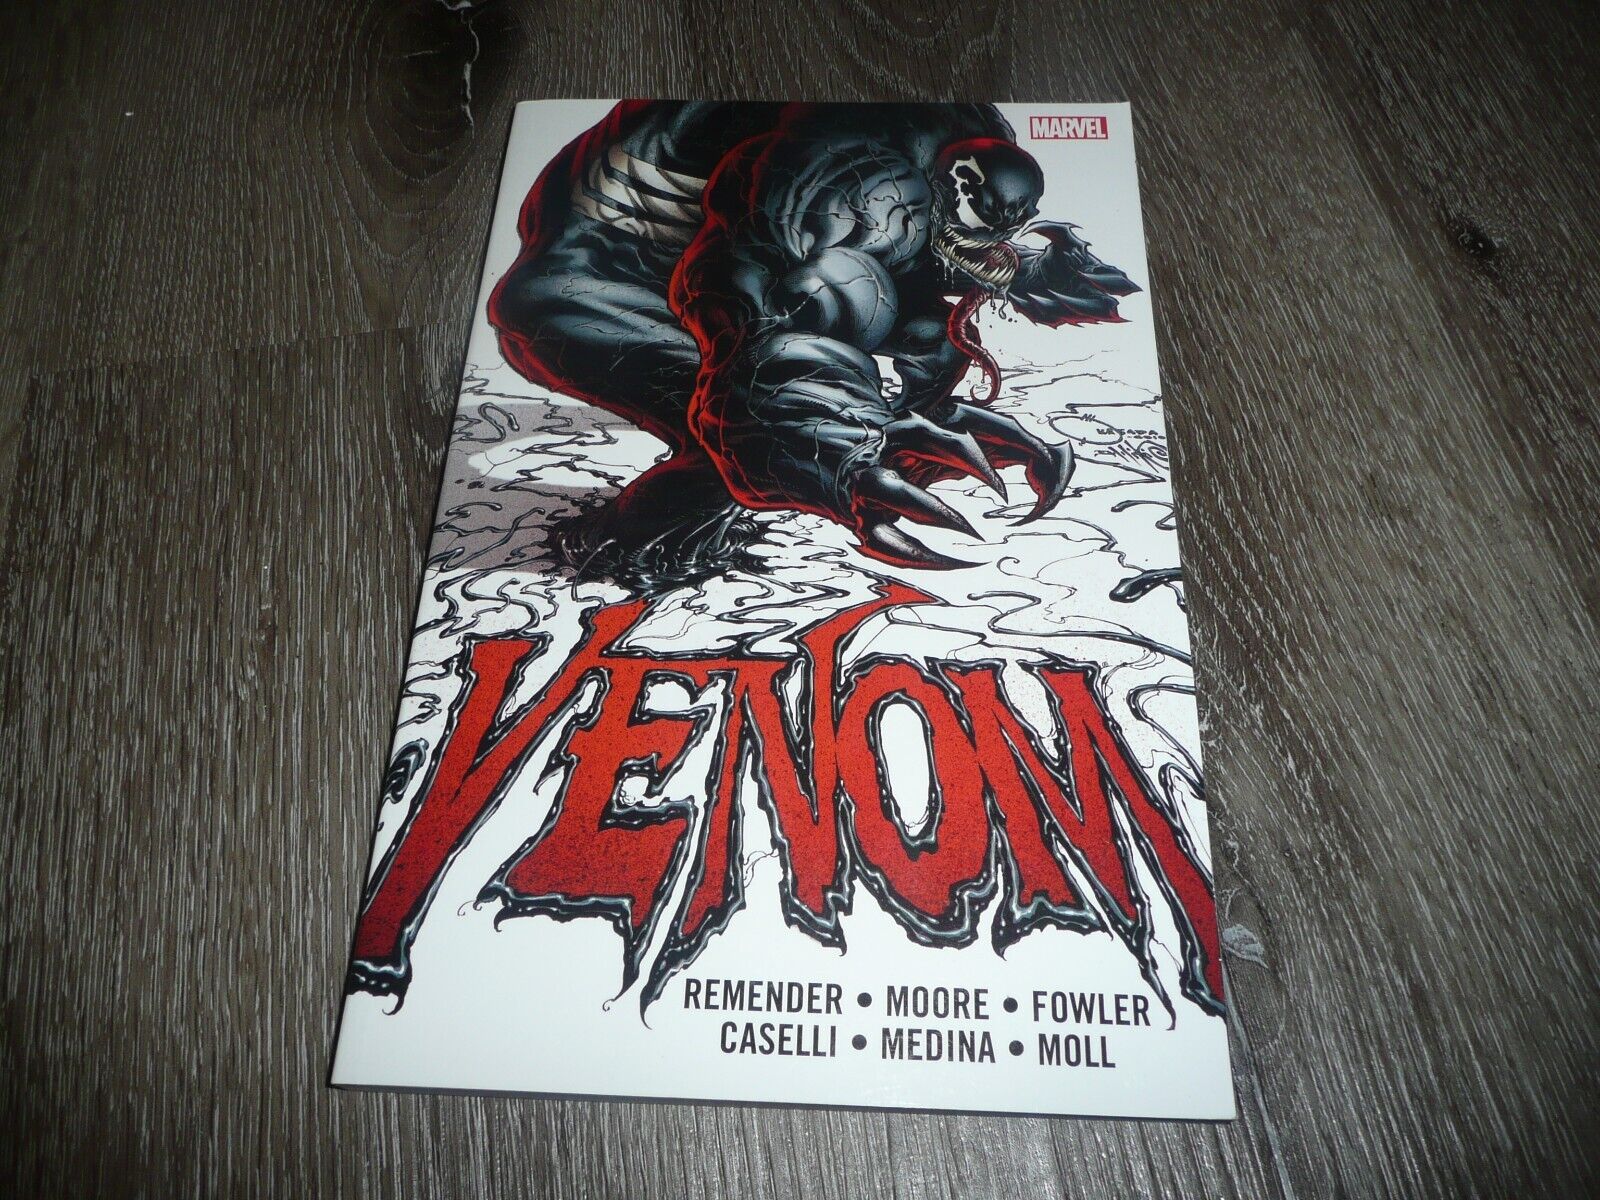 Venom by Rick Remender: The Complete Collection Vol 1 (Marvel, 2015)